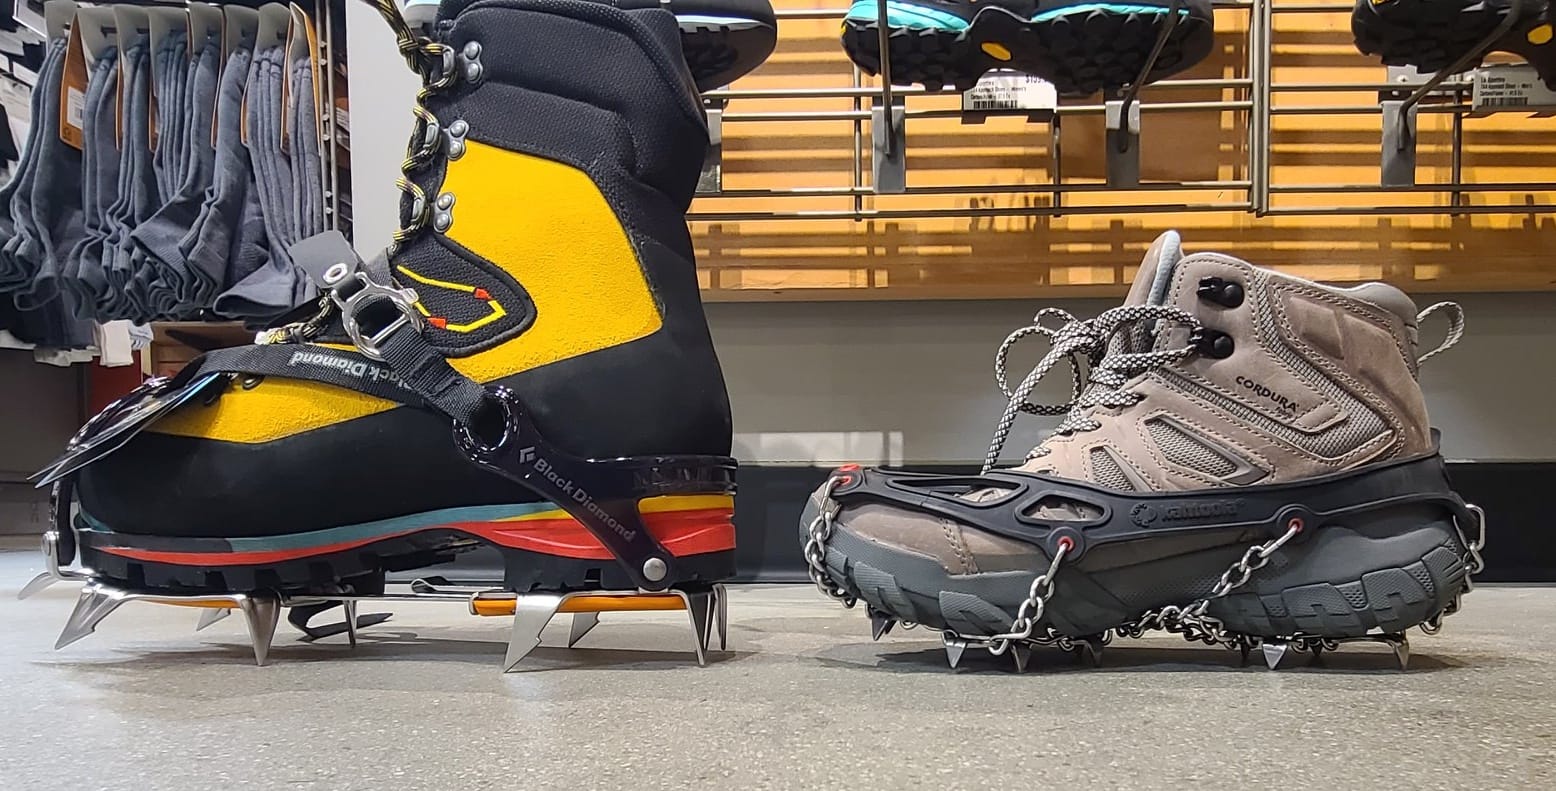 image of crampons and microspikes